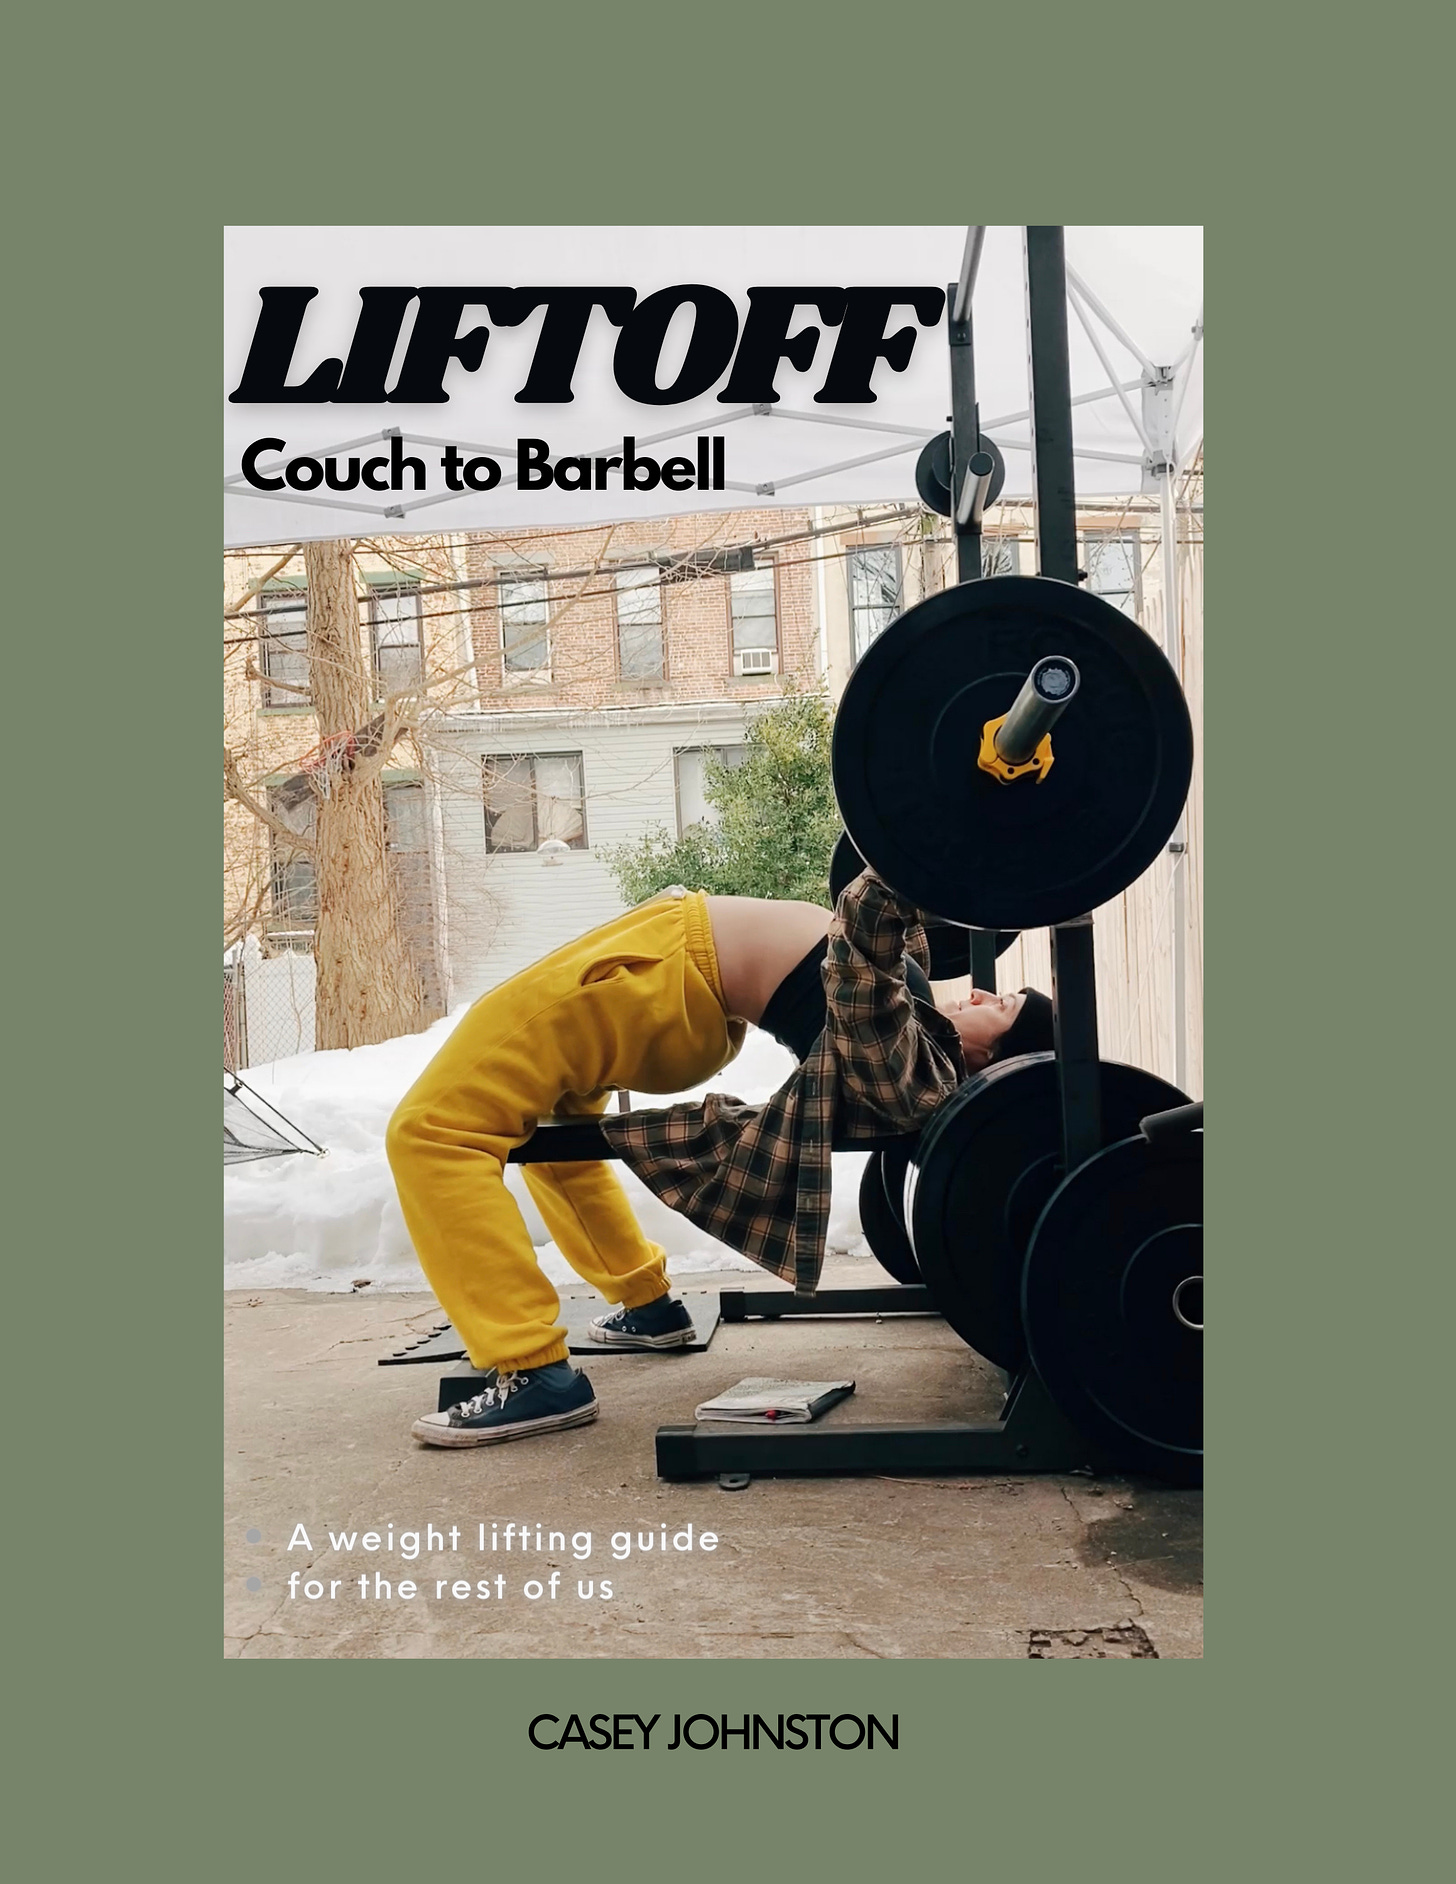 The book cover of Liftoff: Couch to Barbell features Casey Johnston in her home gym in yellow sweatpants and a flannel shirt, lying with an arched back on a weight bench, preparing to bench press a barbell with weights on it.